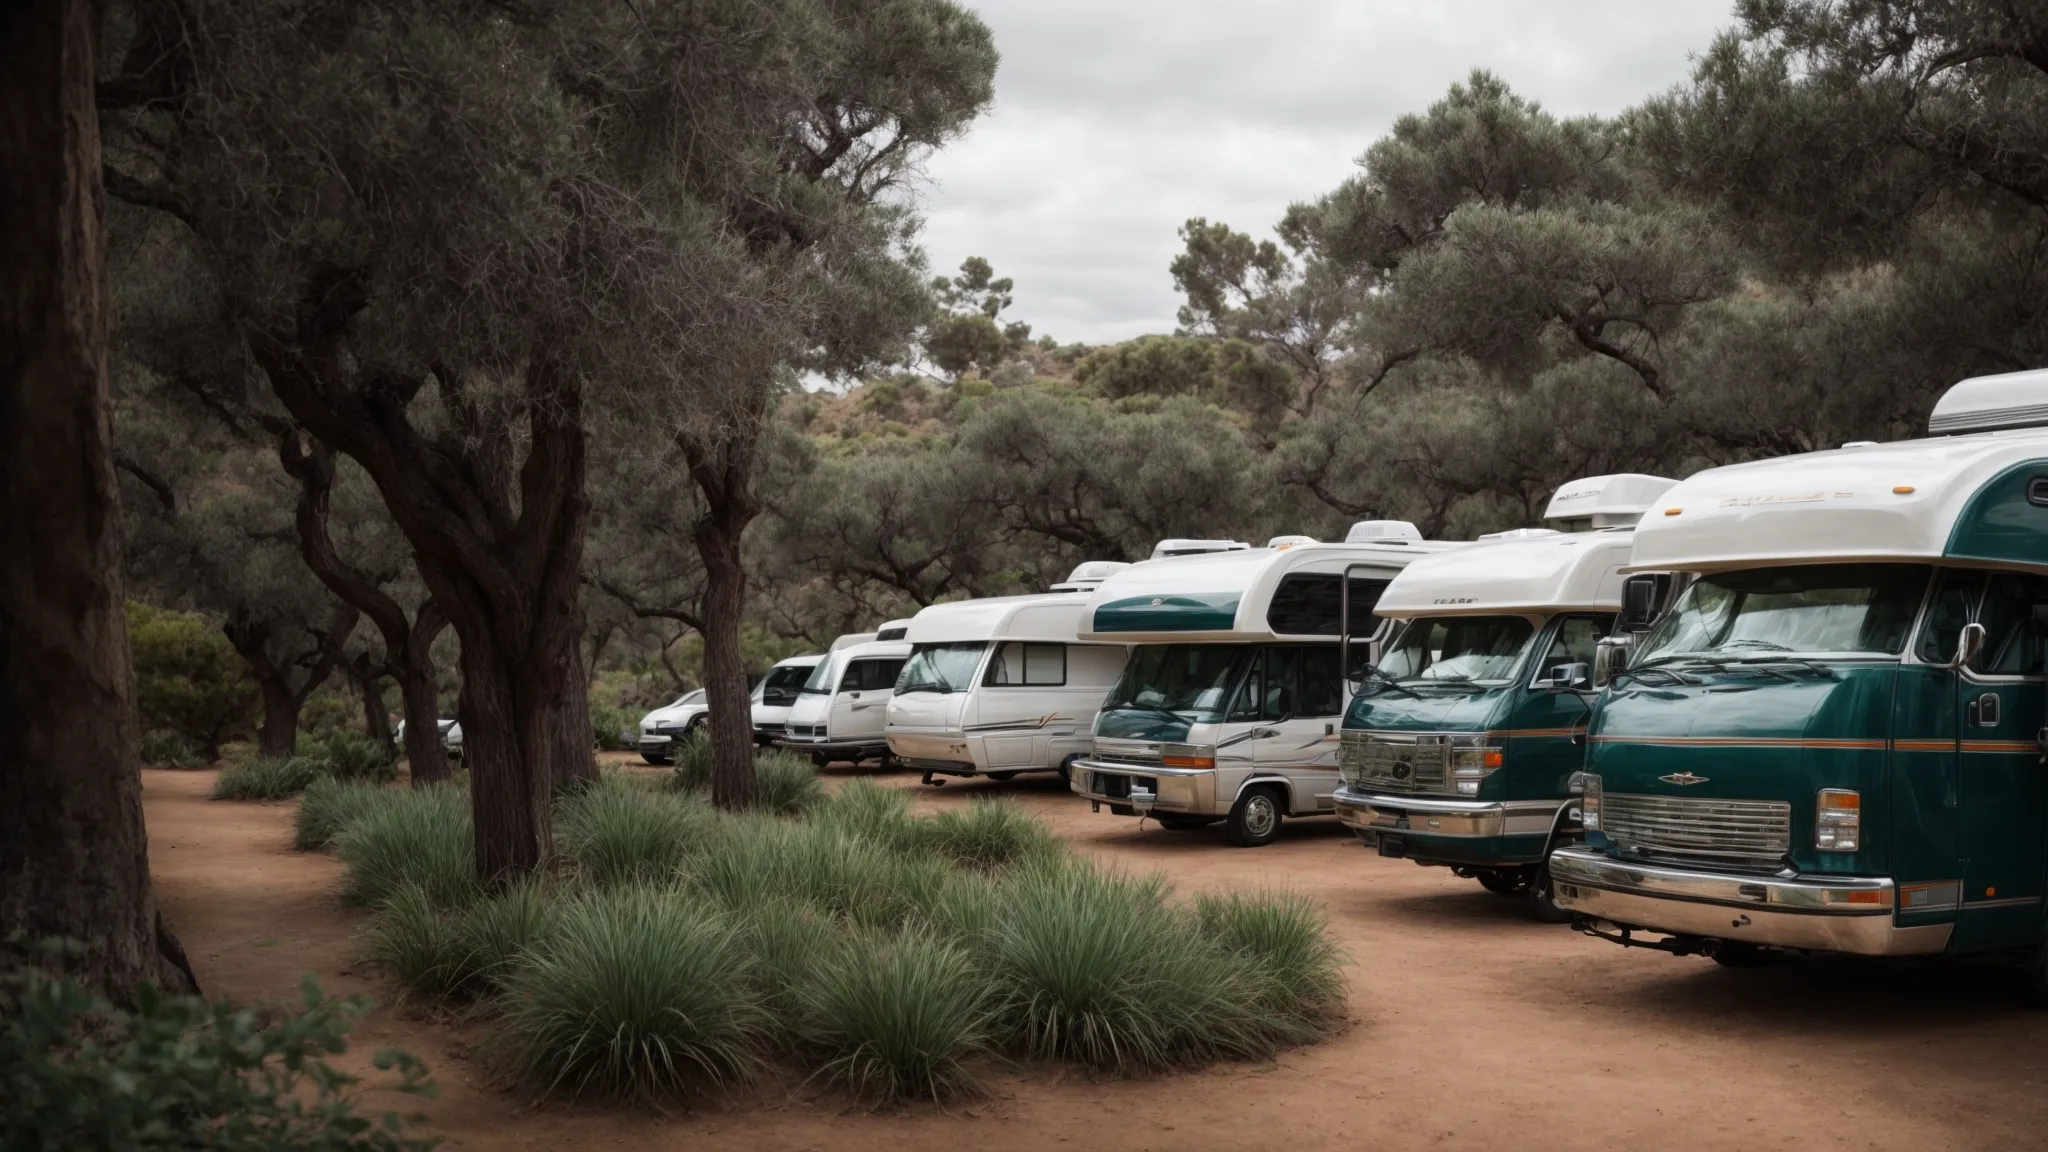 an array of sleek rvs nestled peacefully among the lush greenery of a san diego park, ready for adventure.